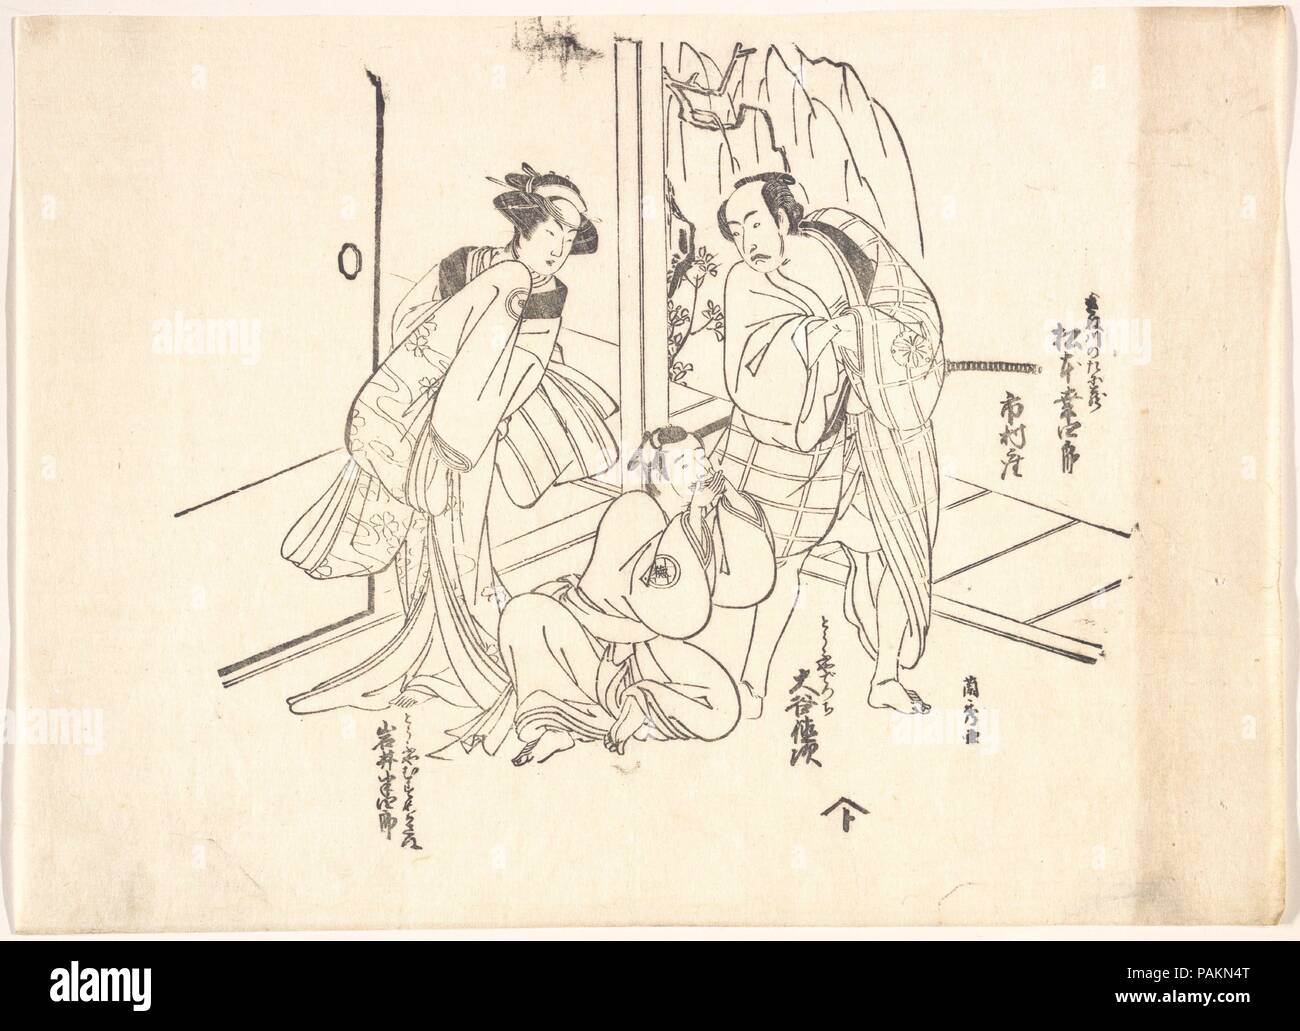 Scene from a Drama: Matsumoto Koshiro I and Two Other Actors. Artist: Ranshu (Japanese, latter half of the 18th century). Culture: Japan. Dimensions: H. 9 3/4 in. (24.8 cm); W. 13 1/2 in. (34.3 cm). Museum: Metropolitan Museum of Art, New York, USA. Stock Photo